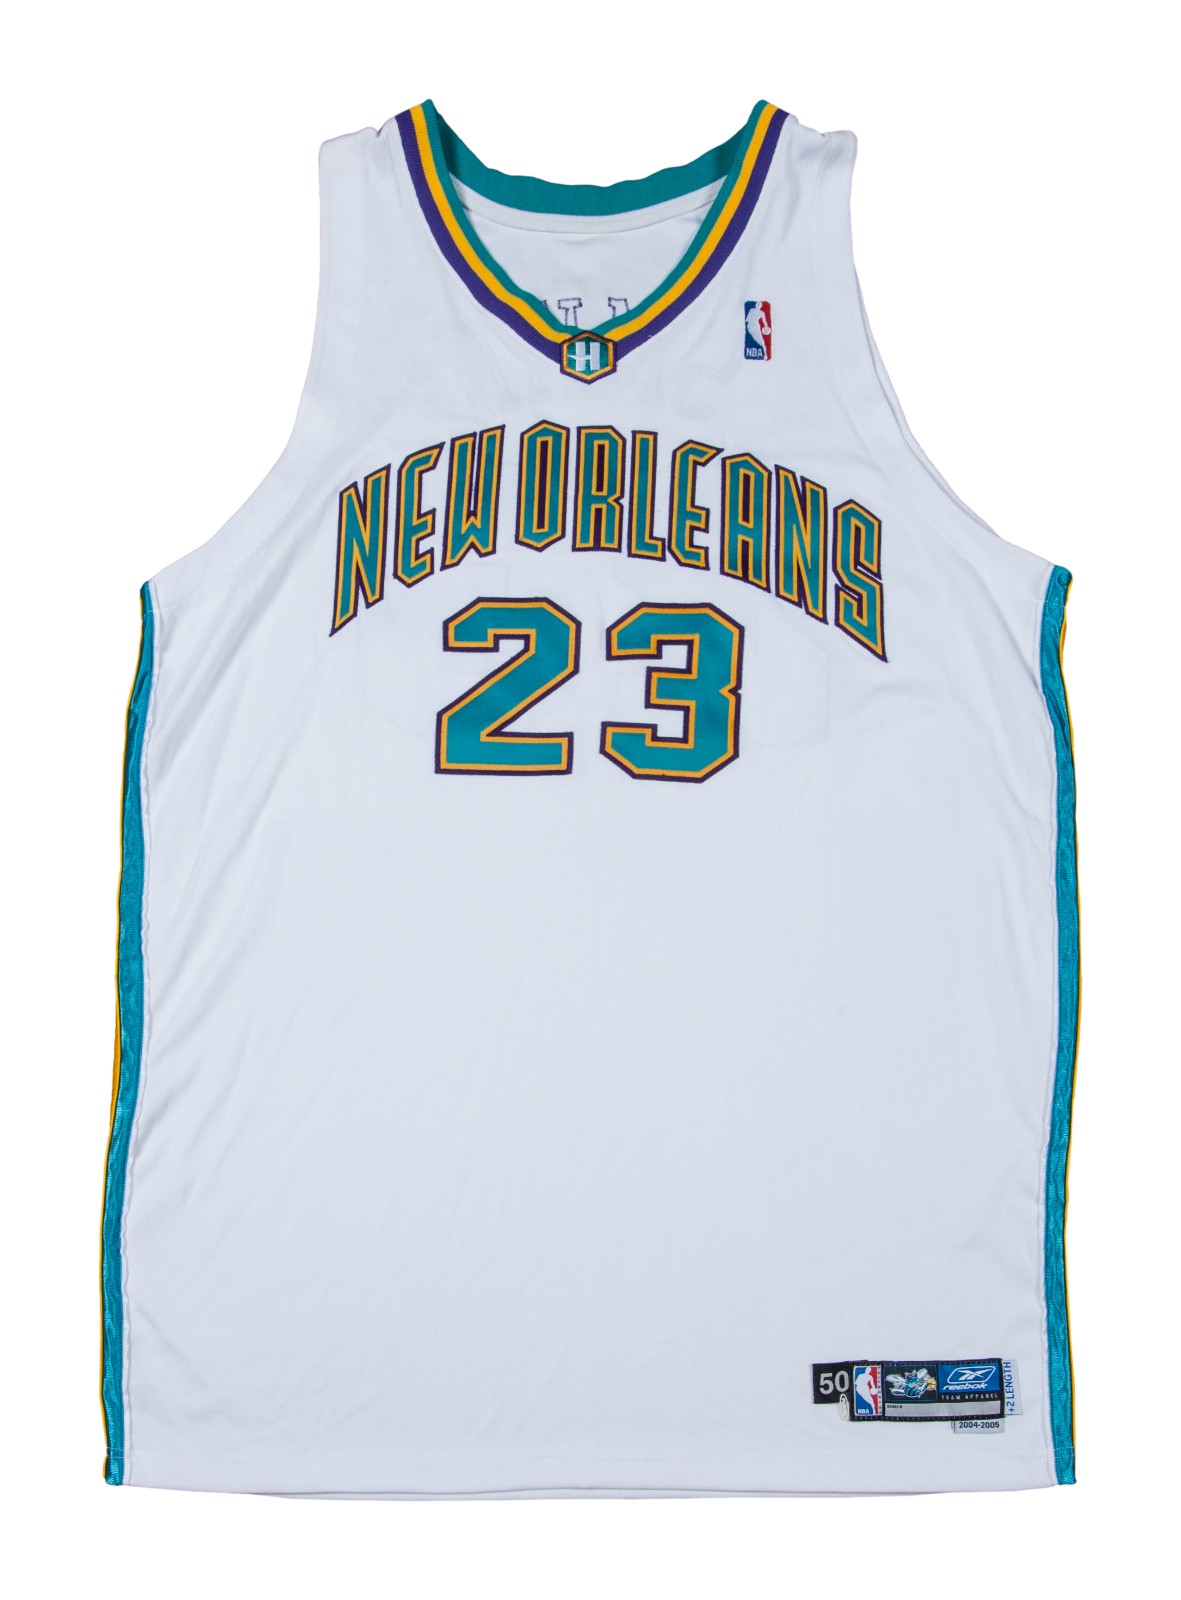 New Orleans Hornets 2003-2005 Home Jersey